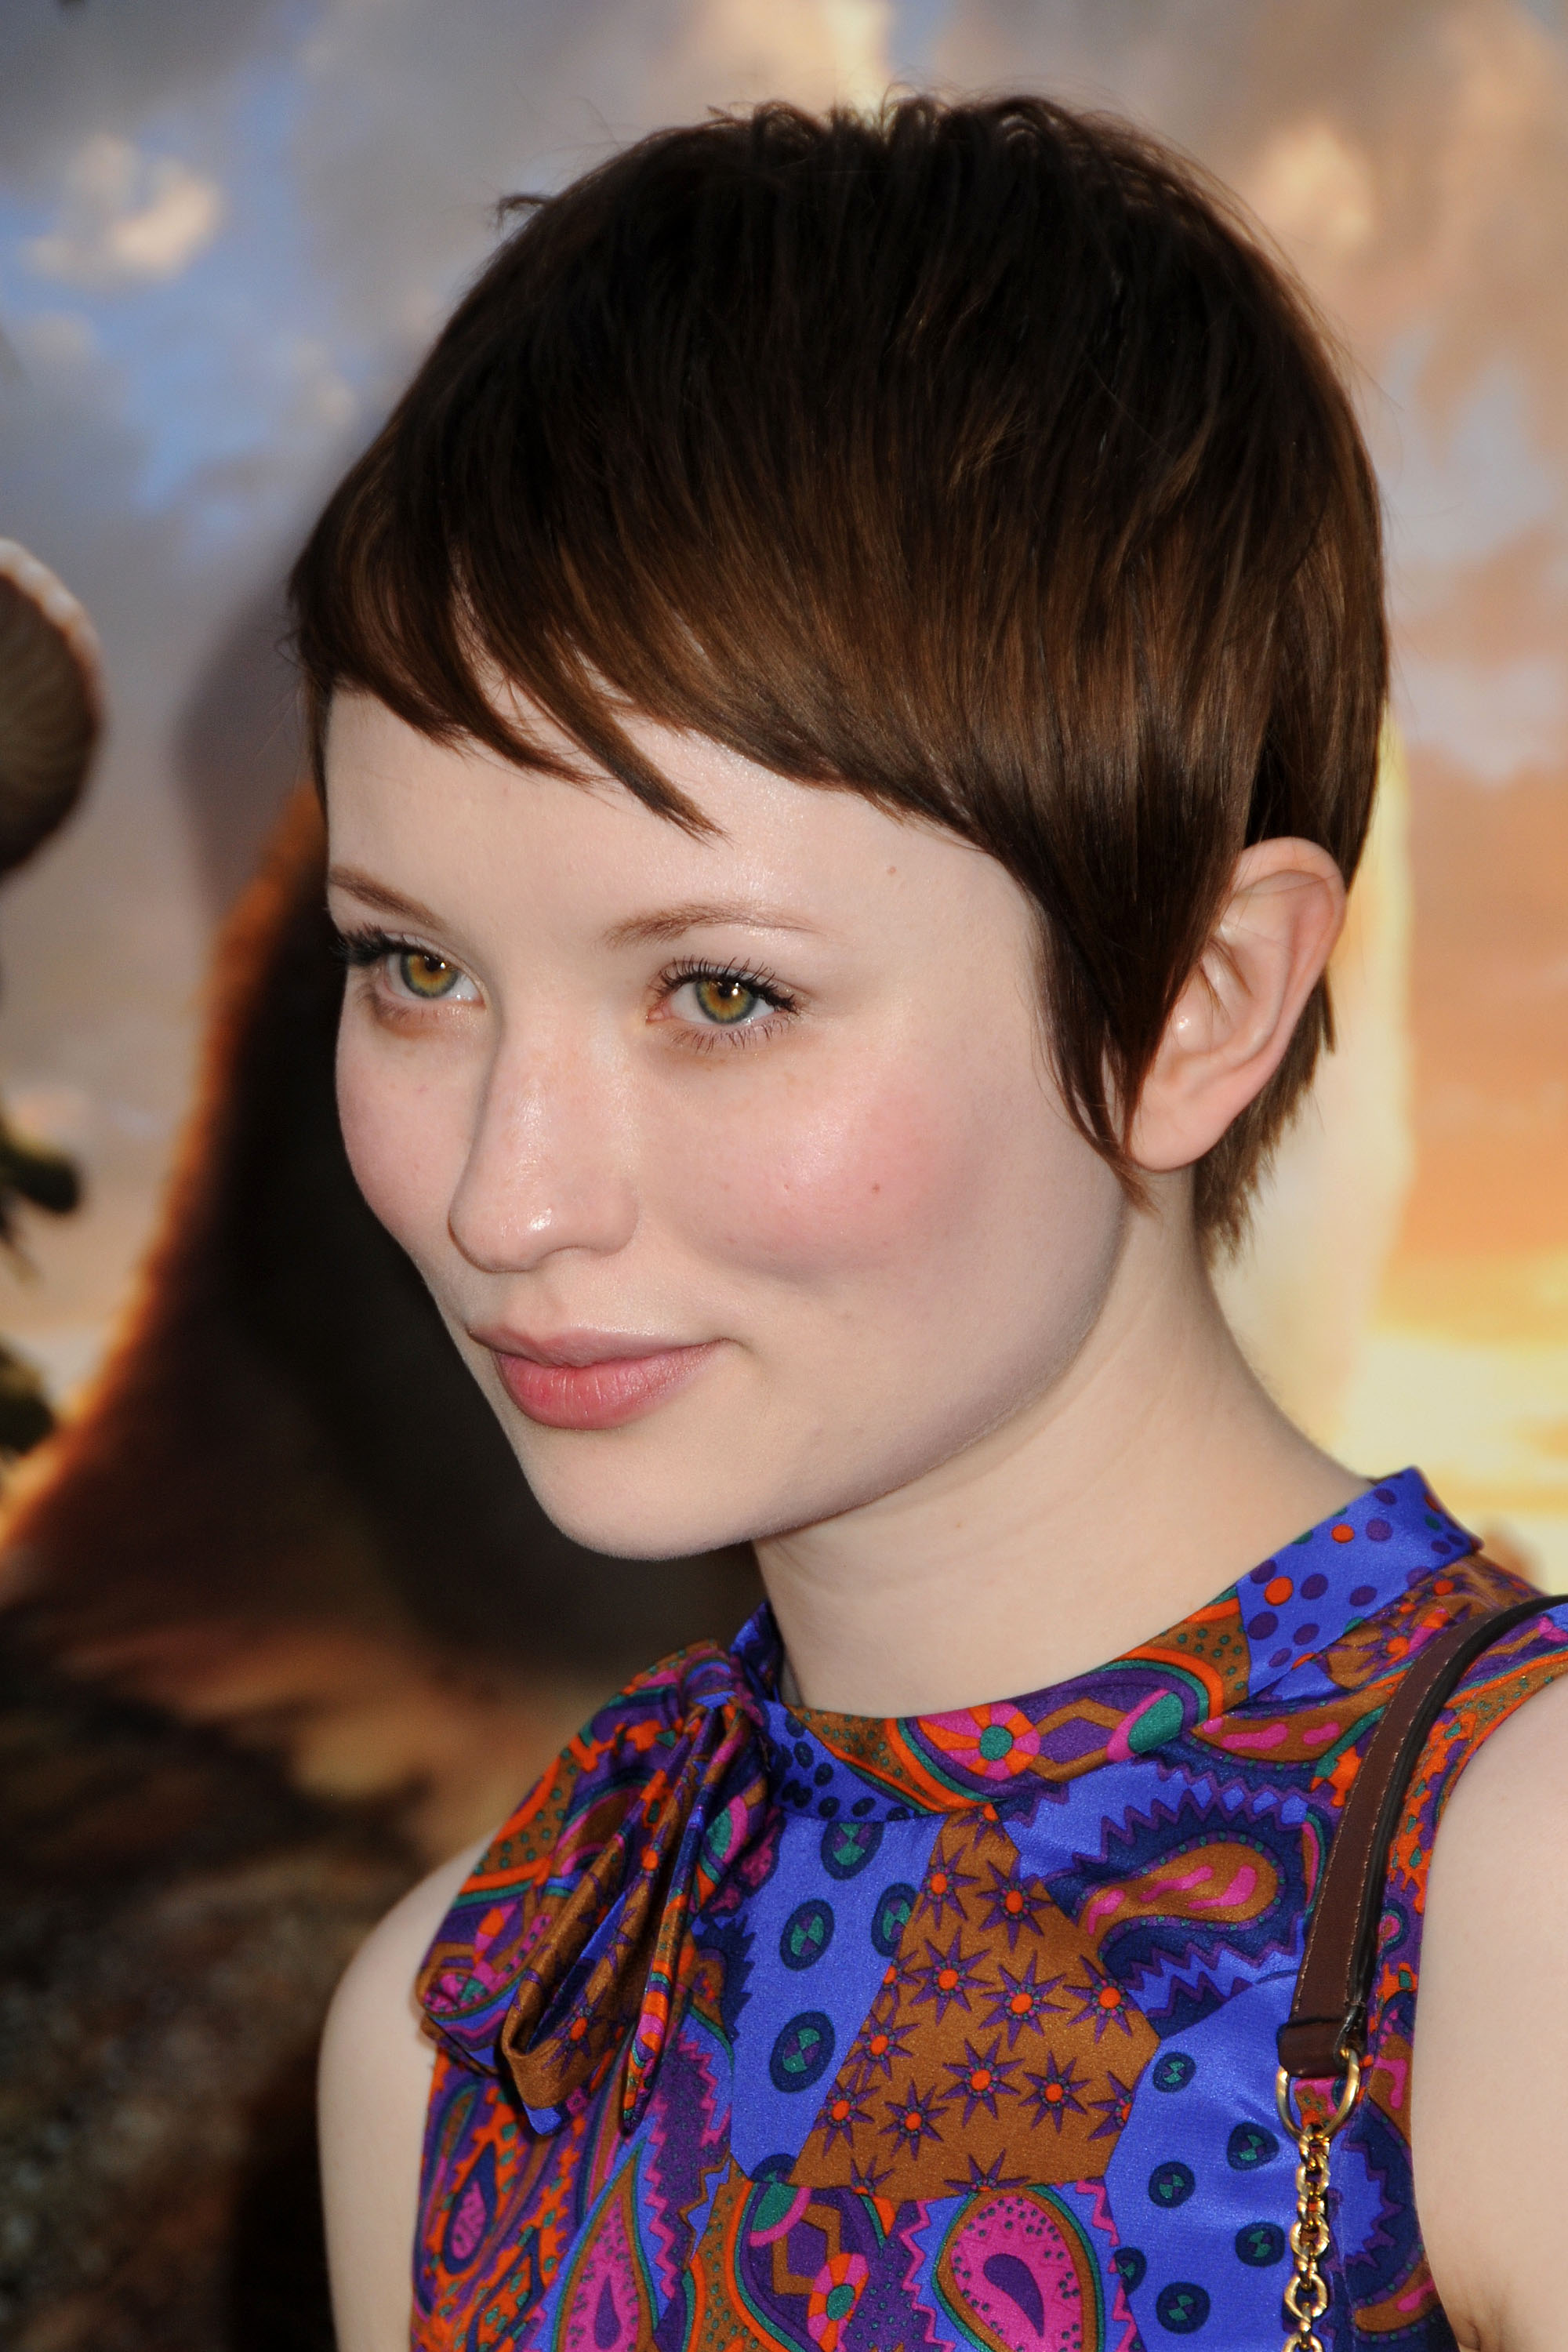 Emily Browning photo 23 of 277 pics, wallpaper - photo #319262 - ThePlace2